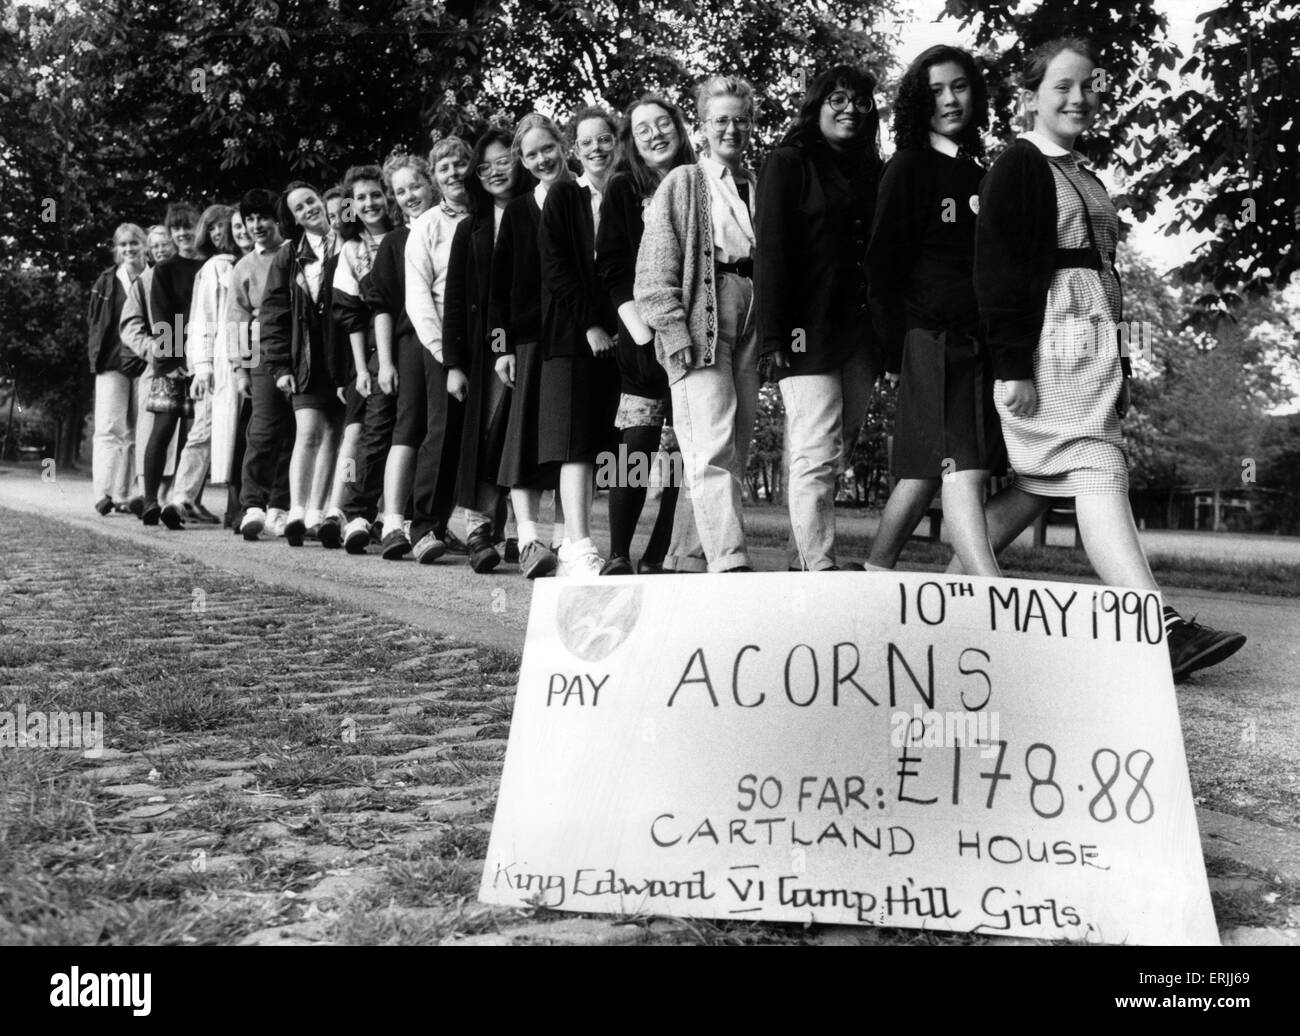 Pupils and Teachers from King Edward's Camp Hill Girls School in Kings Heath with a £178.88 cheque, money raised for a three mile walk, for Acorns Children's Hospice, Oak Tree Lane, Selly Oak, Birmingham. 10th May 1990. Stock Photo